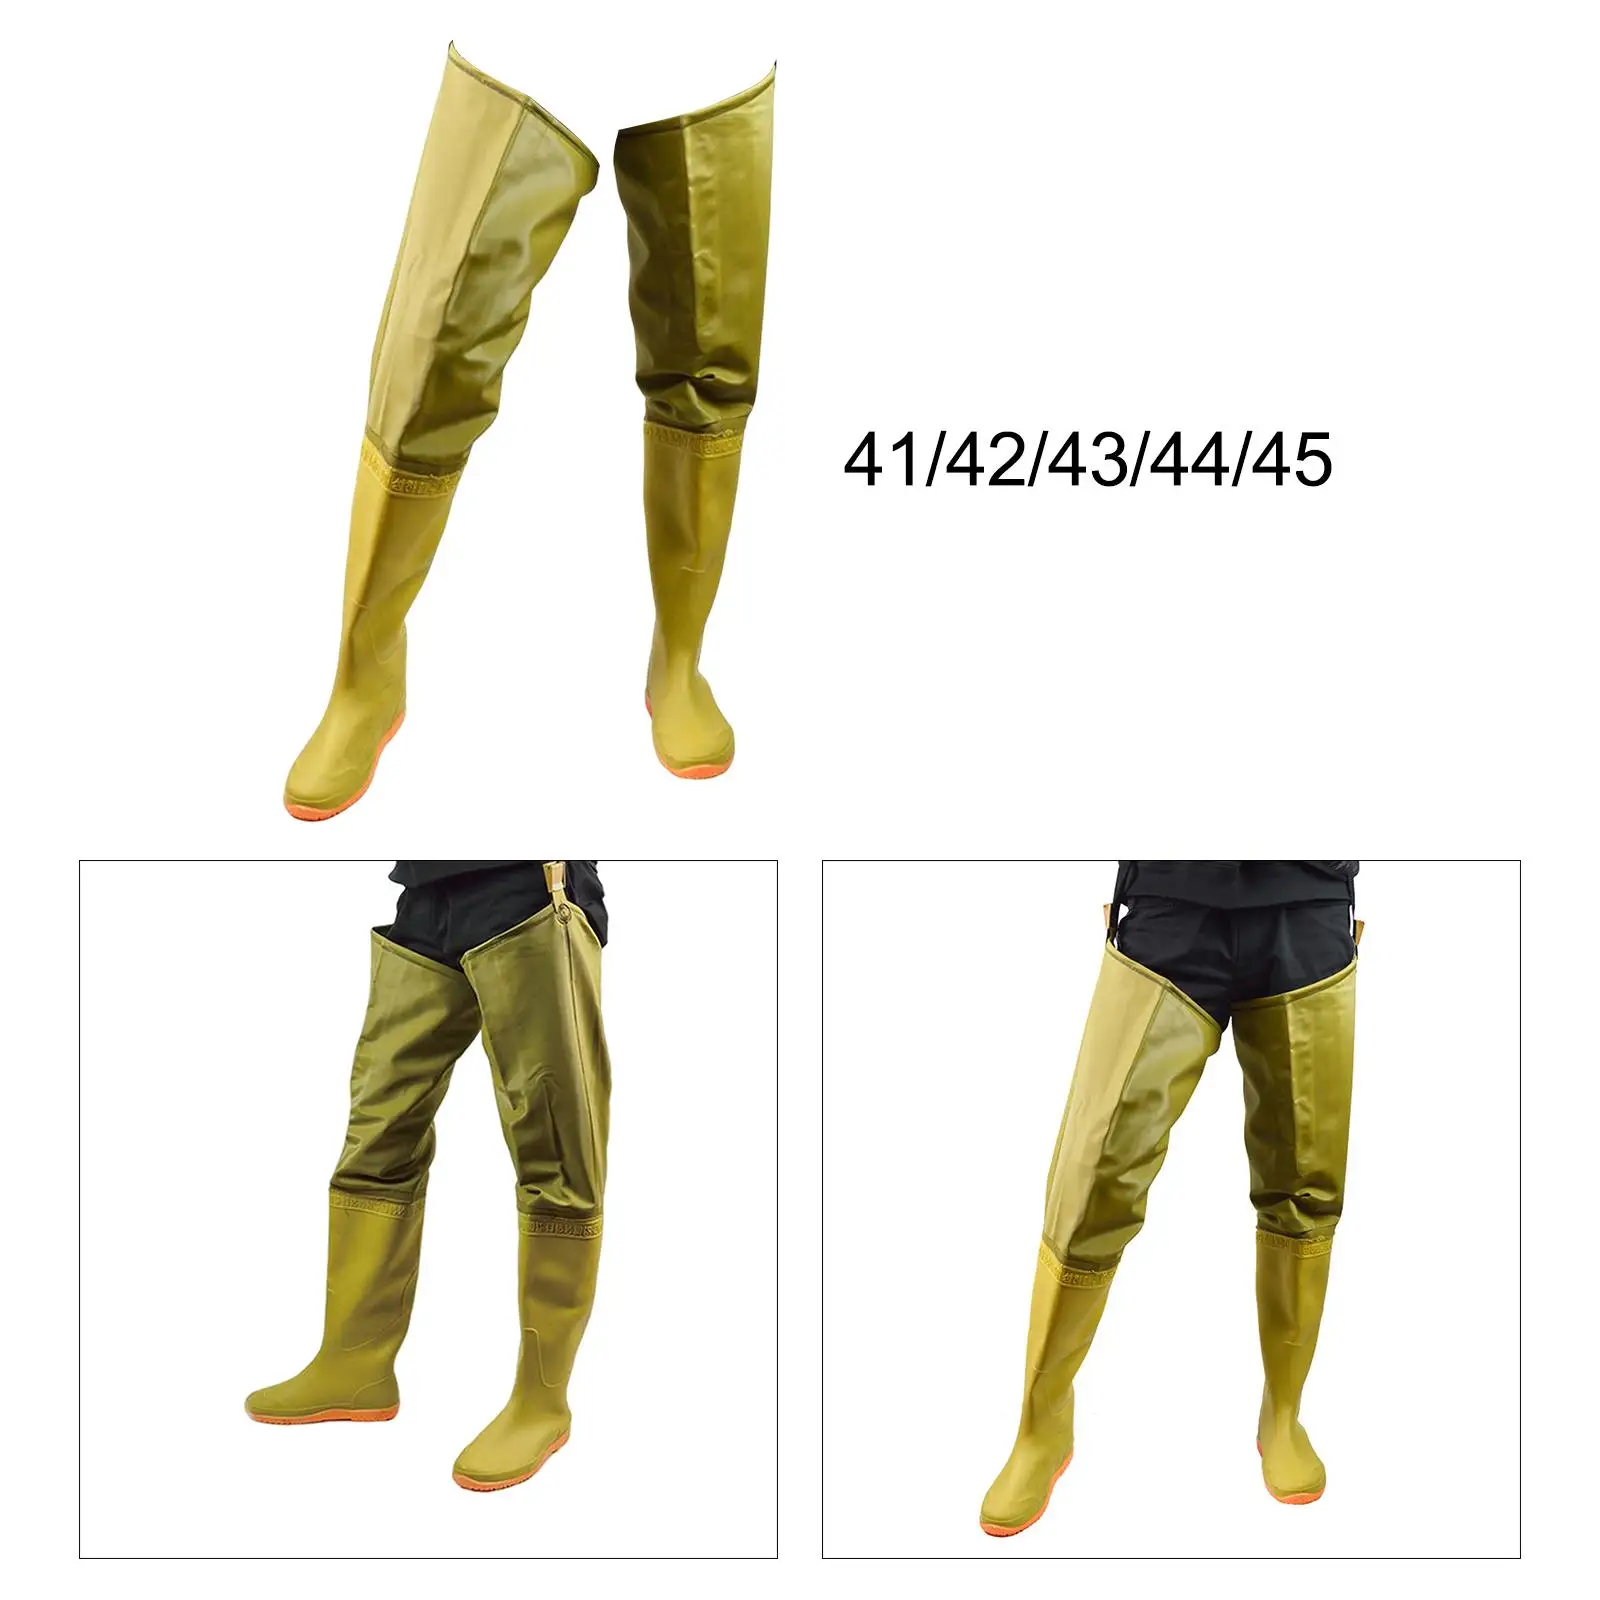 Fishing Hip Waders Waterproof Wading Hip Boots Water Pants with Buckle Boots Wellies Nylon Fishing Waders for Fishing Muck Work